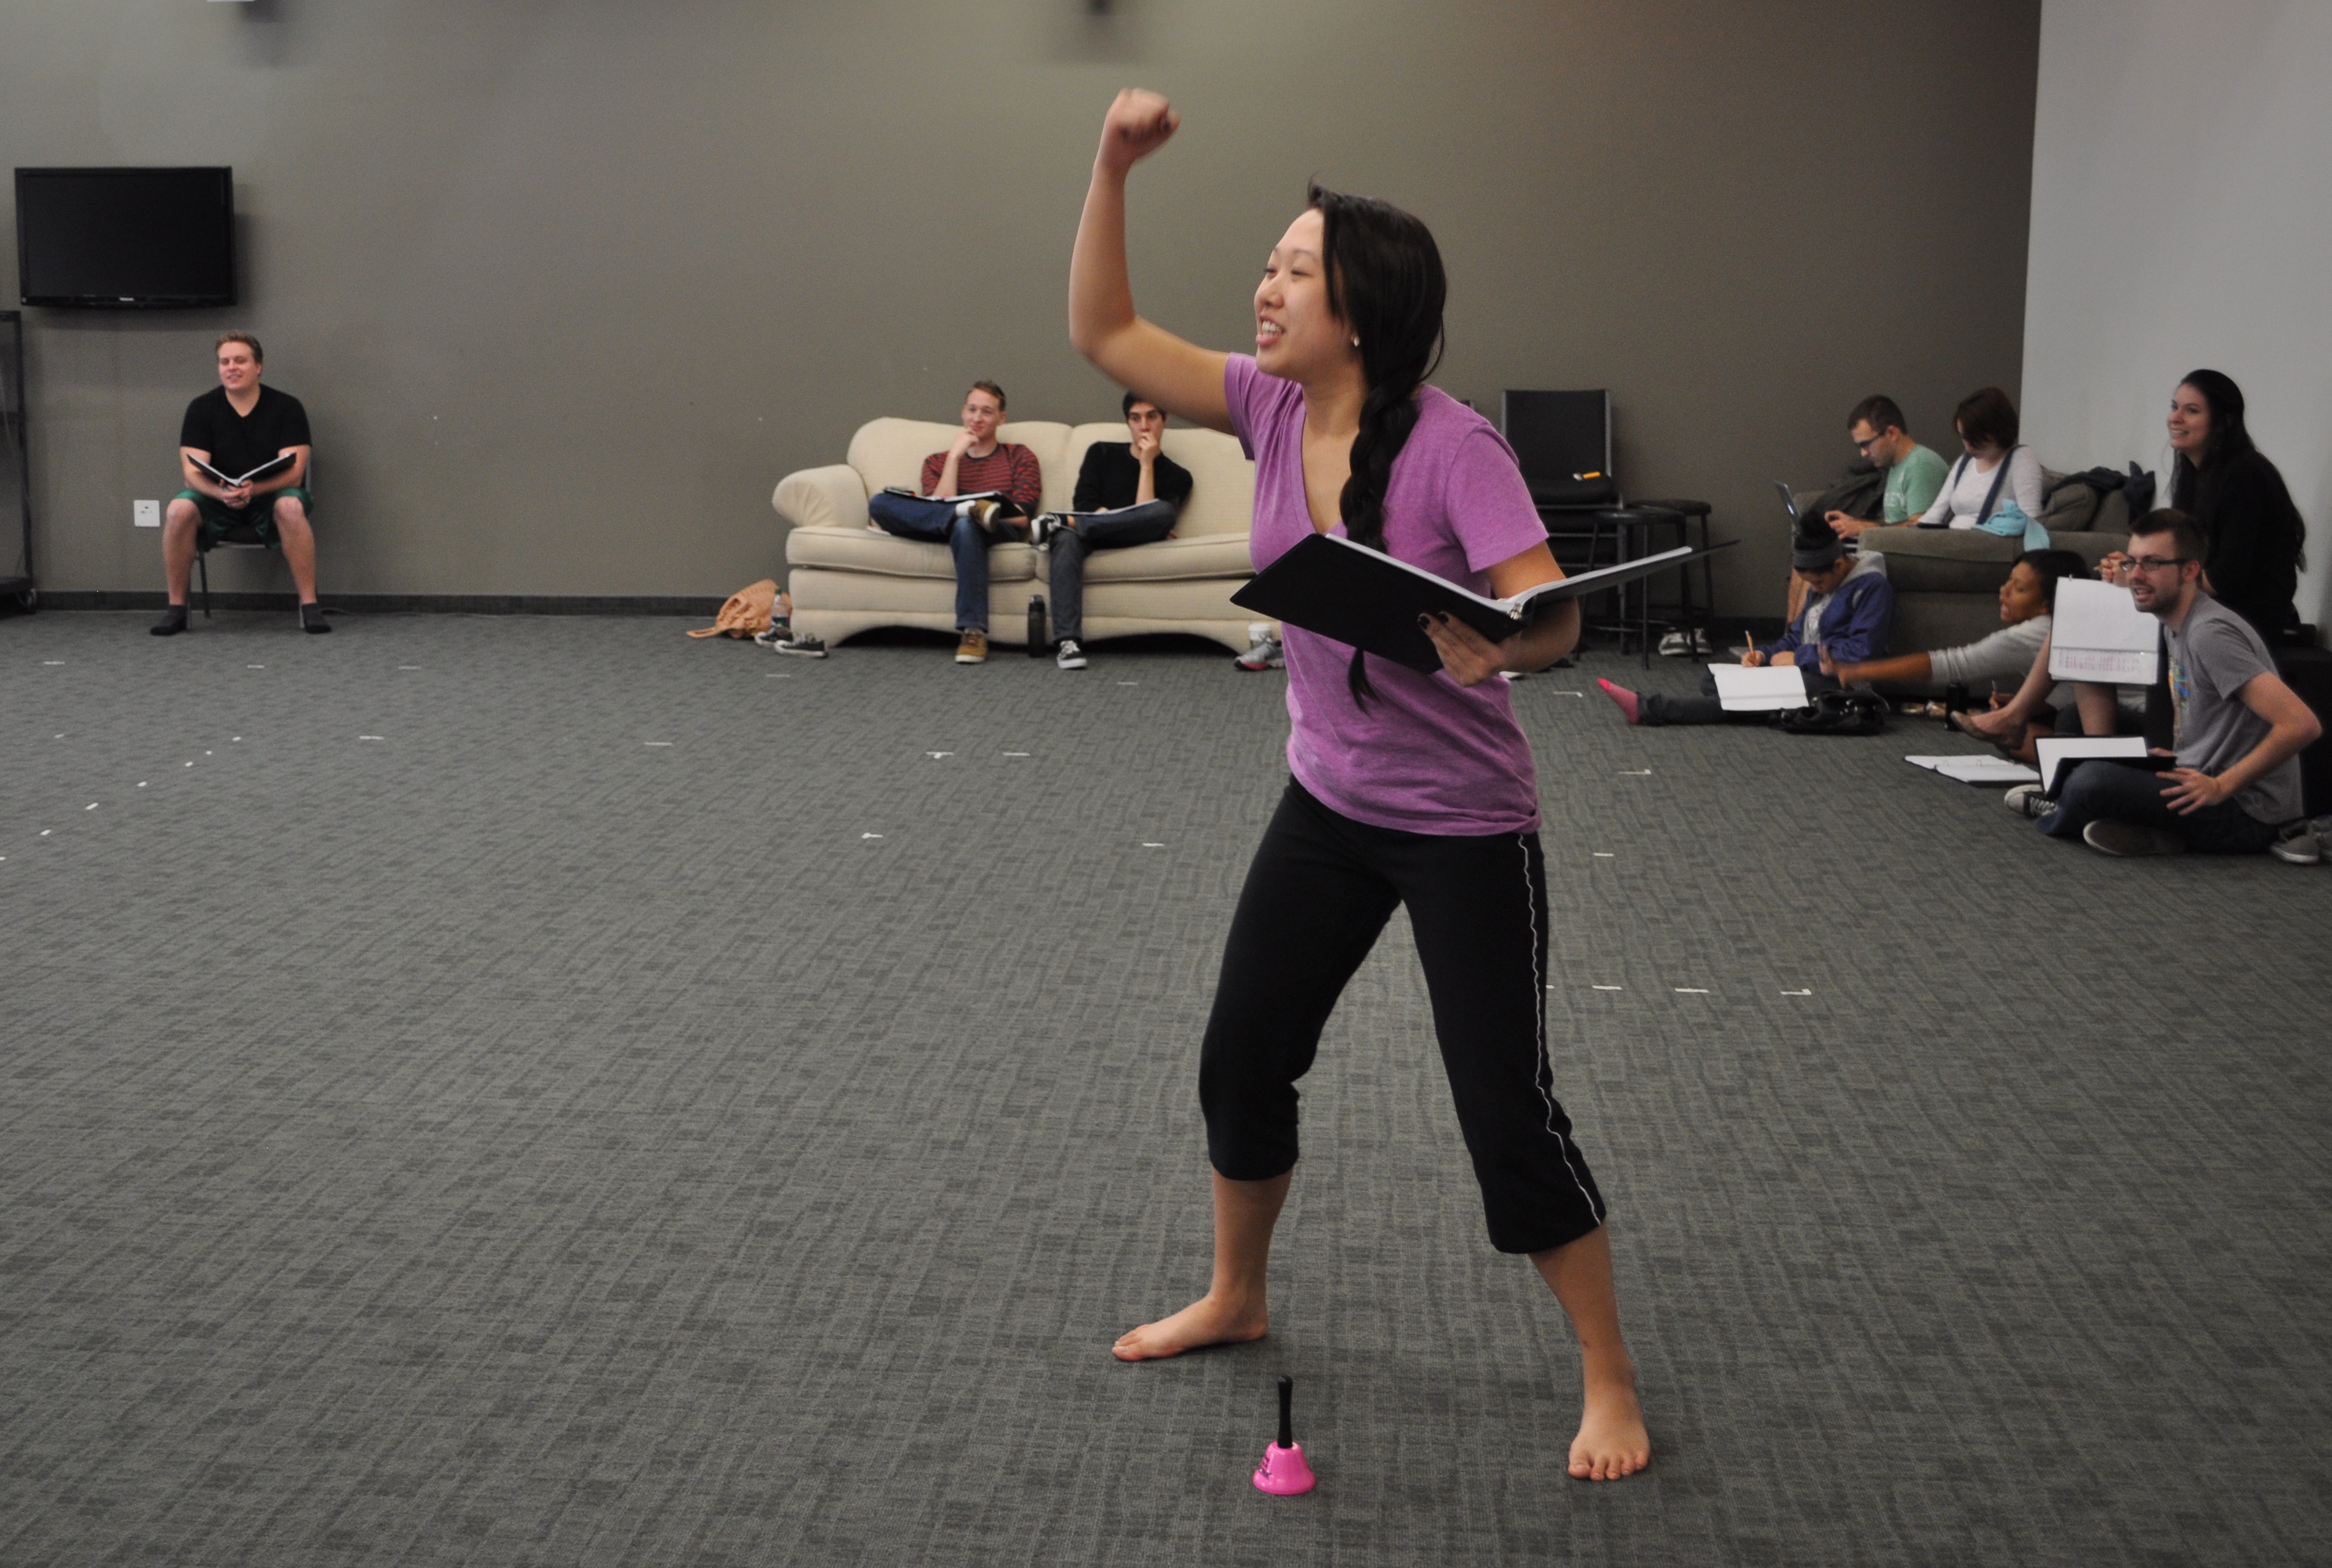 Cindy Nguyen '14 brings punch to the role of Feste the clown during early rehearsals.